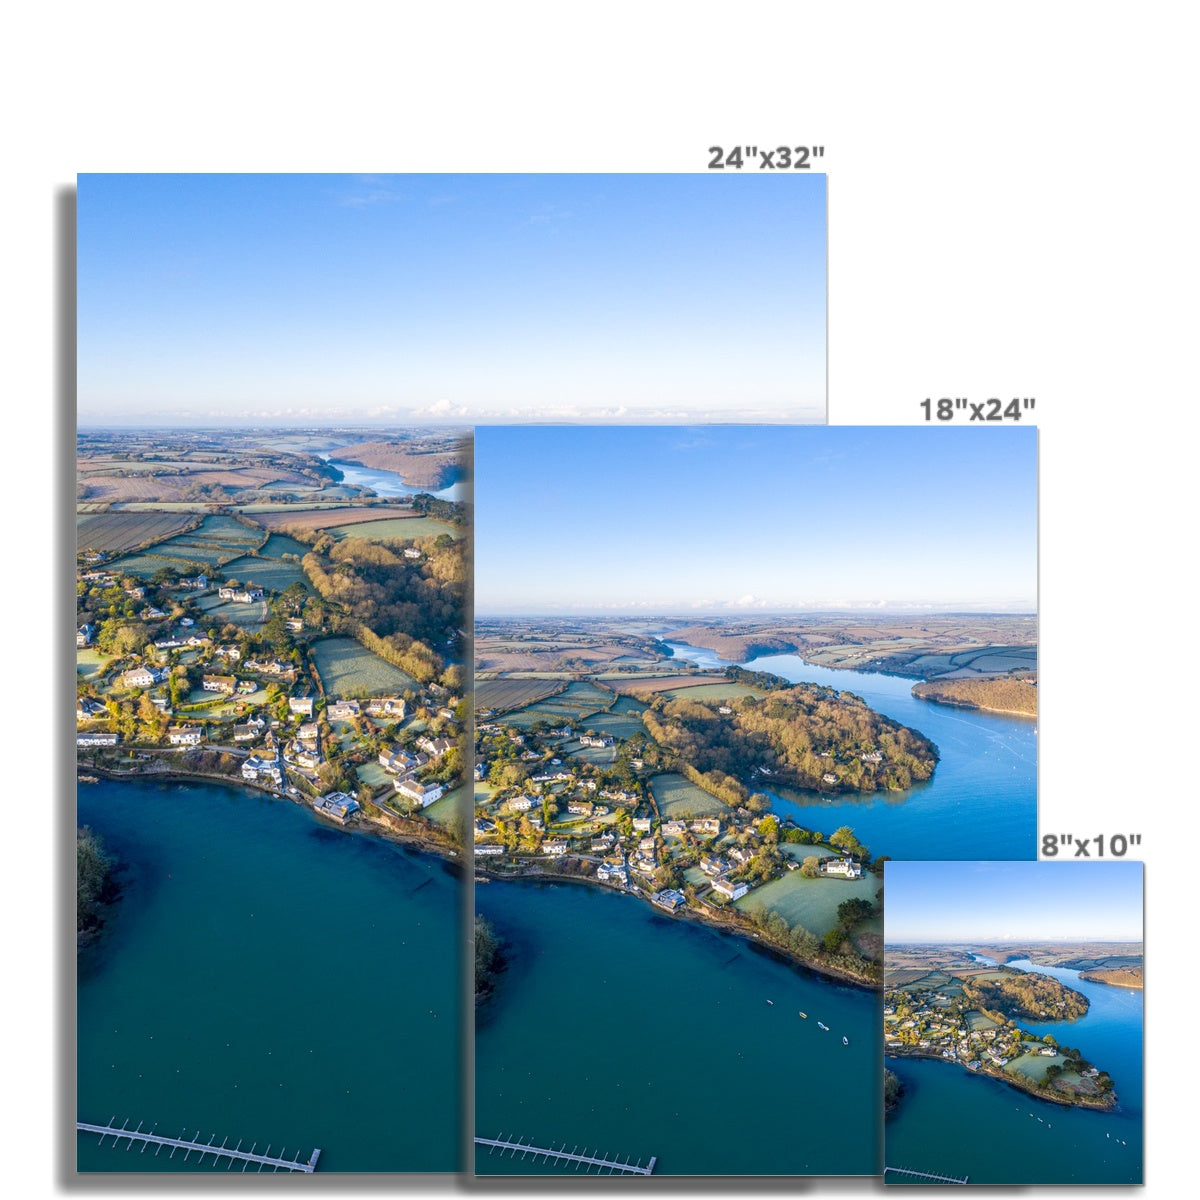 helford picture sizes